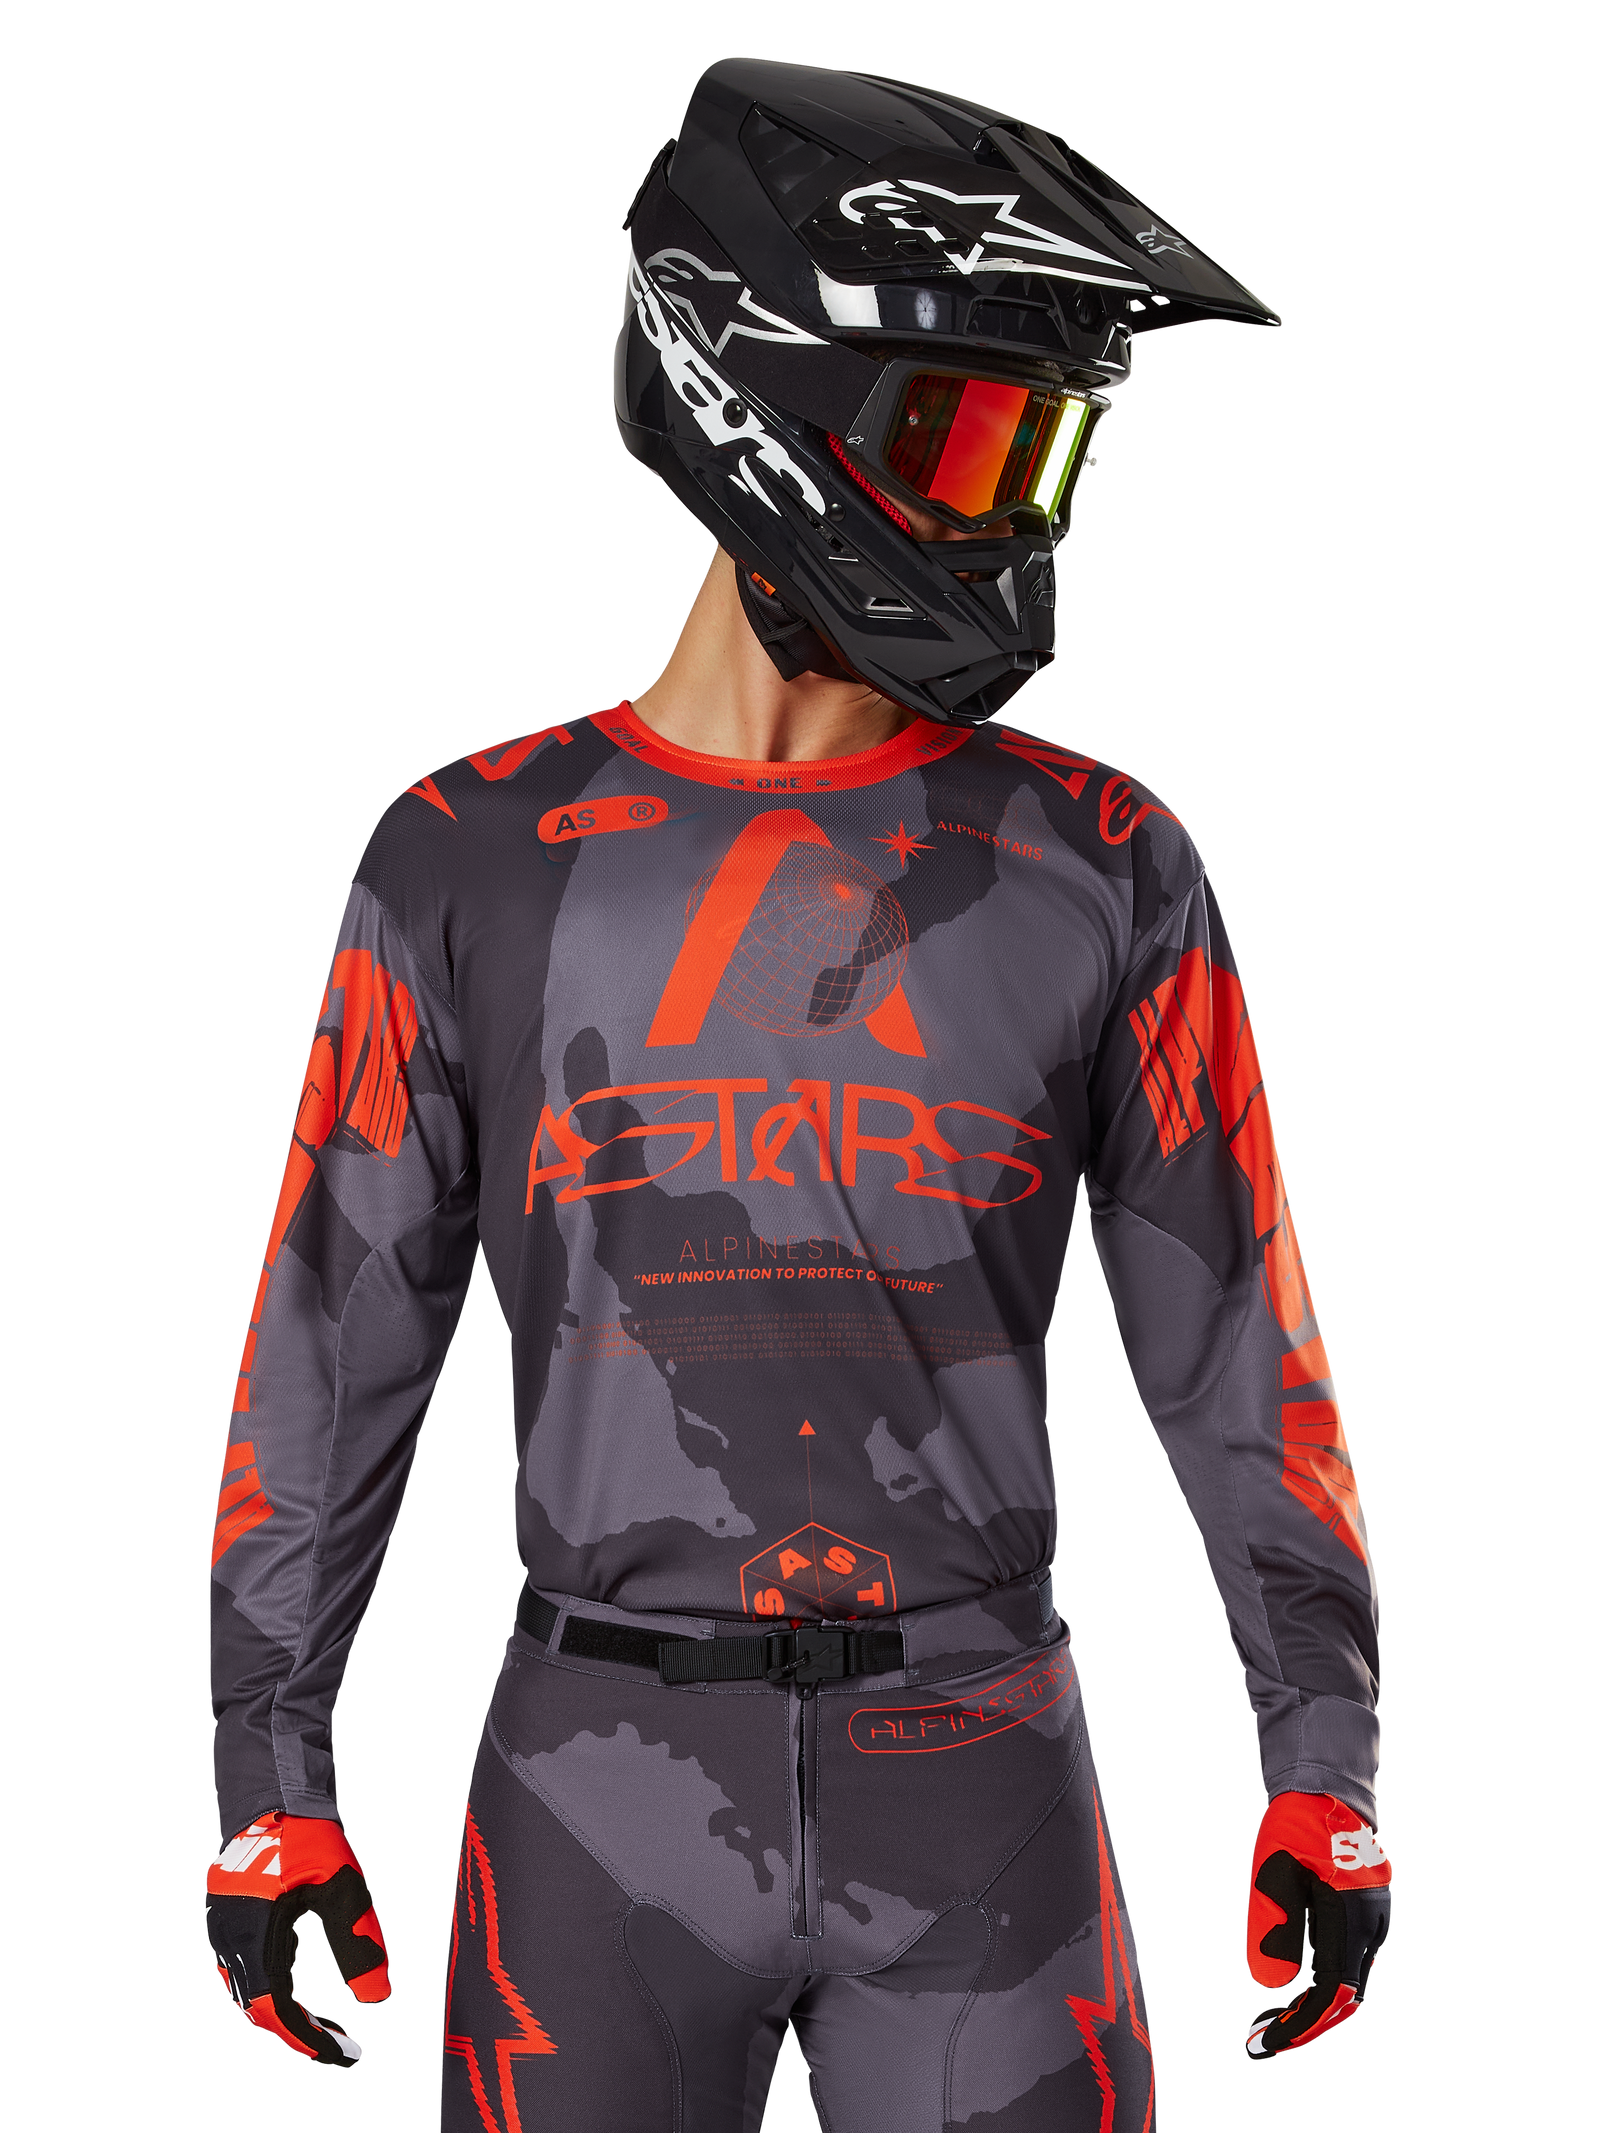 Racer Hollow Maglia